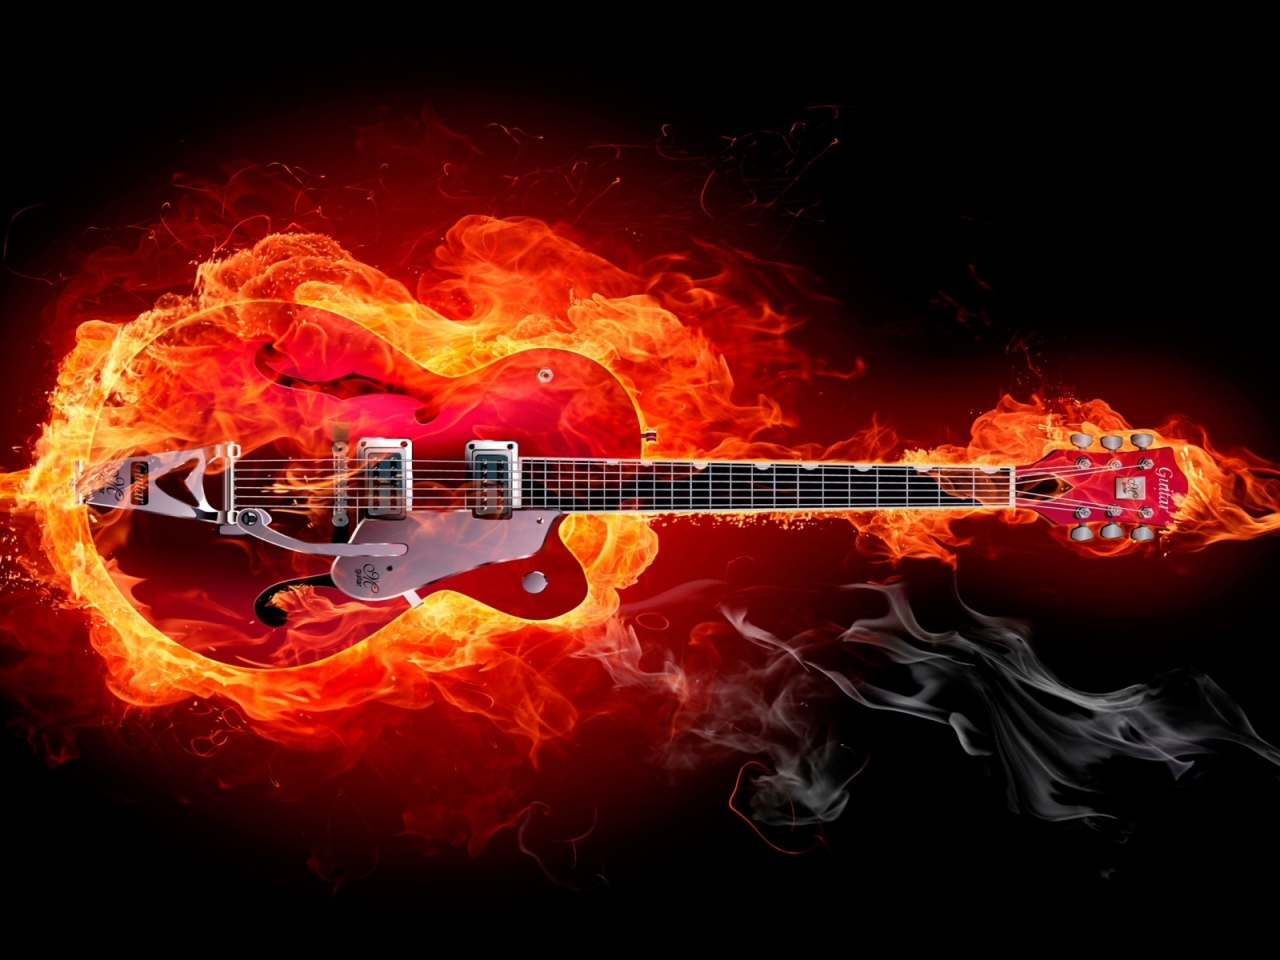 Fire Guitar for 1280 x 960 resolution